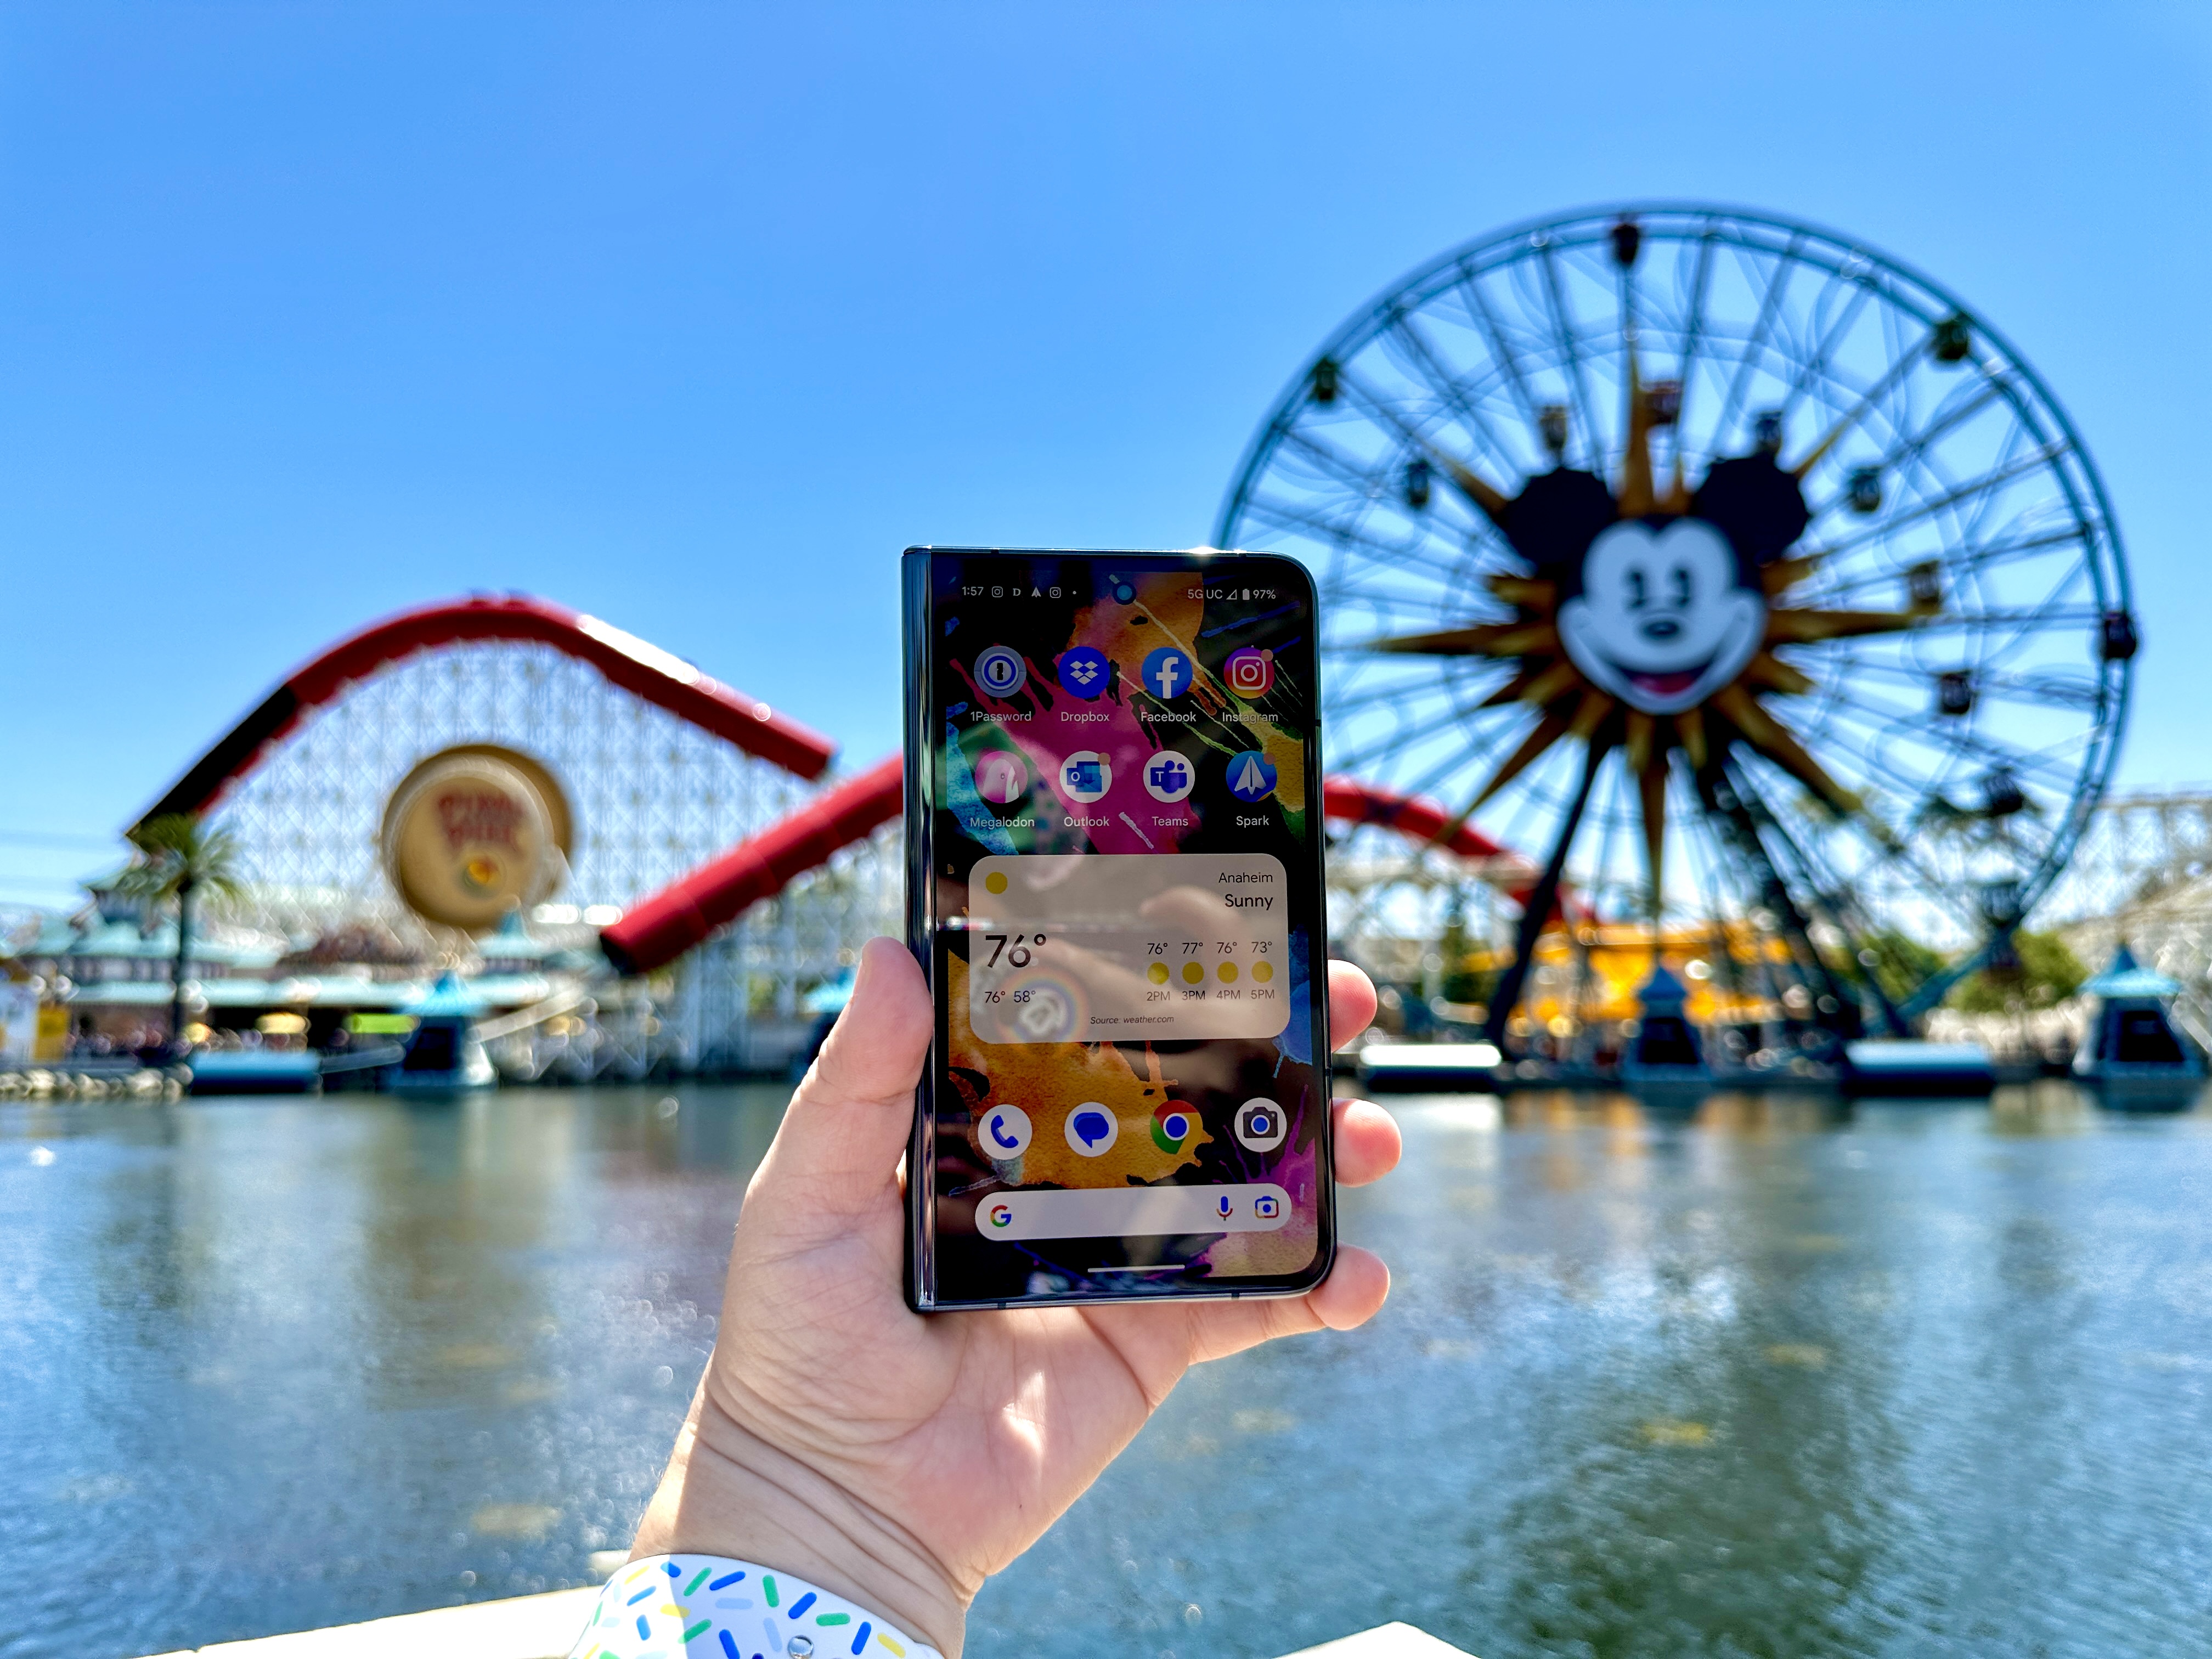 Google Pixel Fold in Obsidian open in hand showing a home screen at Pixar Pier.